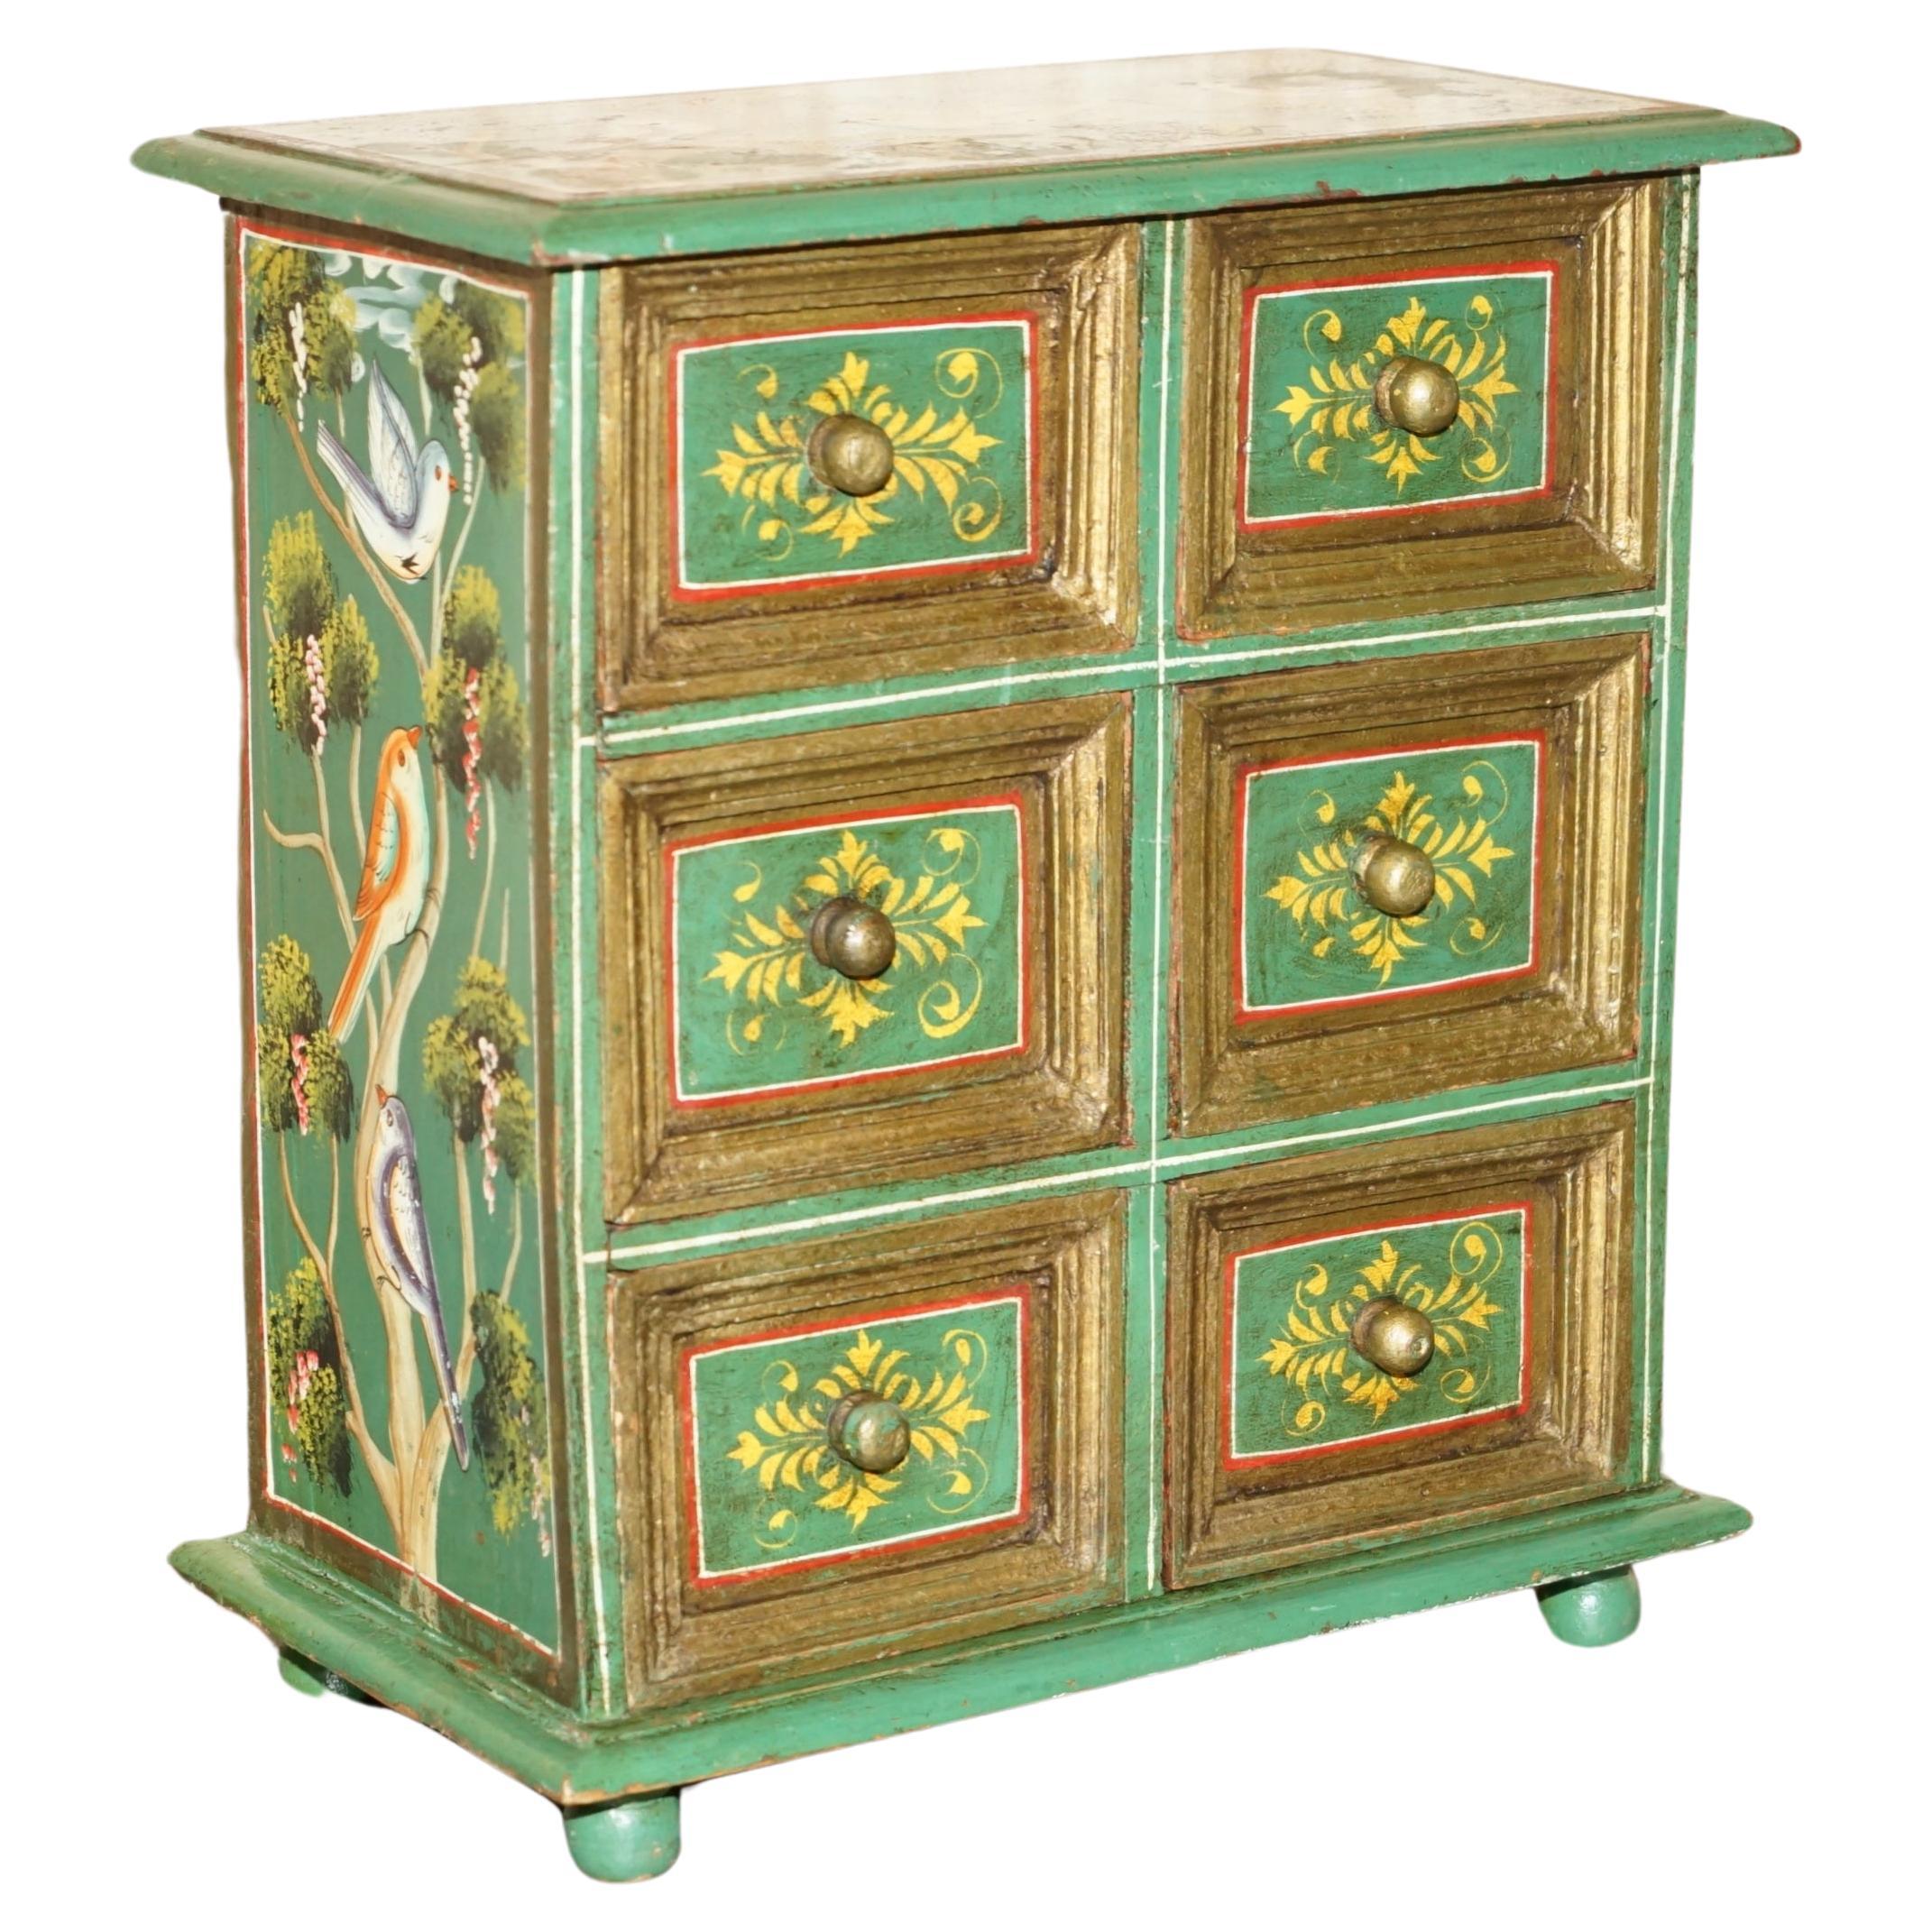 We are delighted to offer for sale this stunning, side table sized chest of drawers which was hand painted with beautiful bords in a floral scene 

A very good looking well made and super decorative piece, this chest looks interesting and important